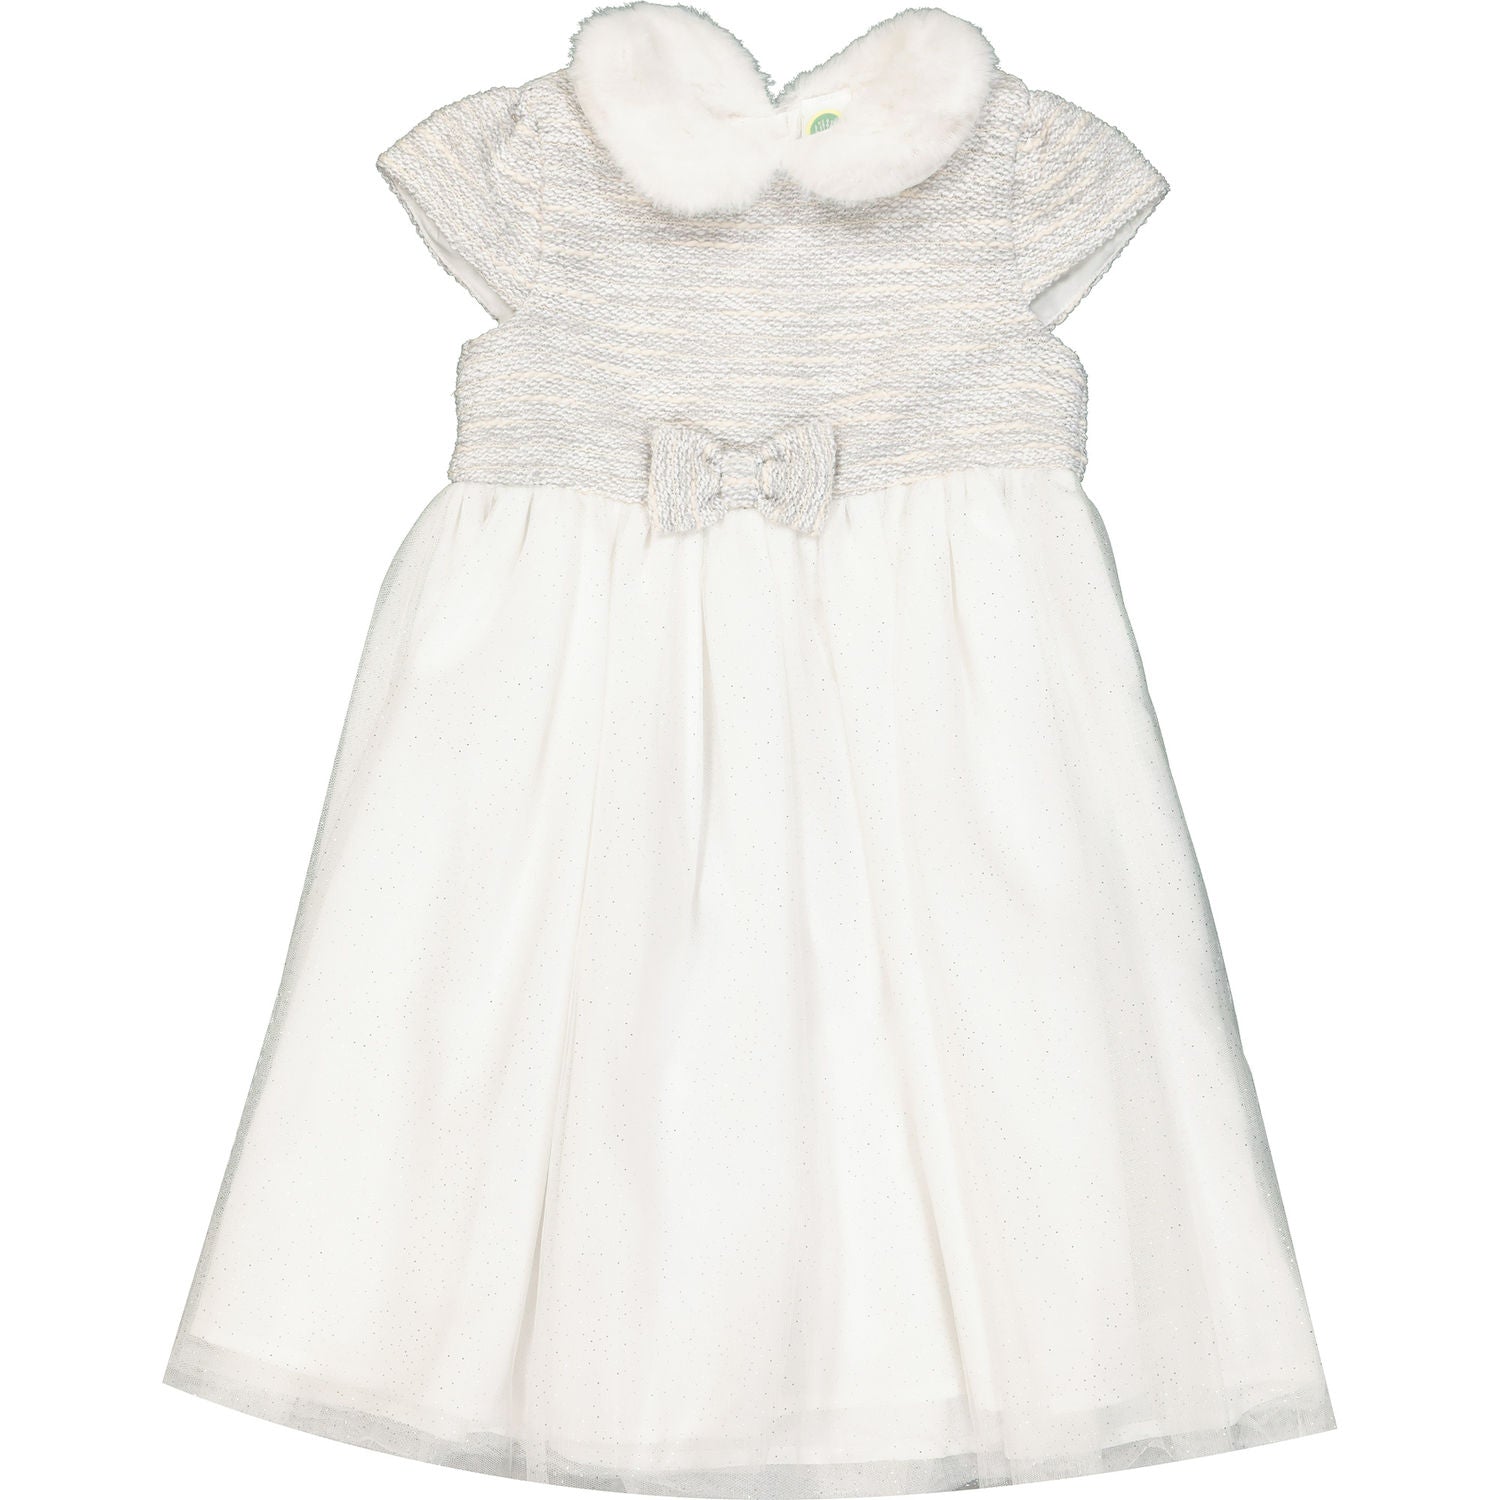 age 2 party dress